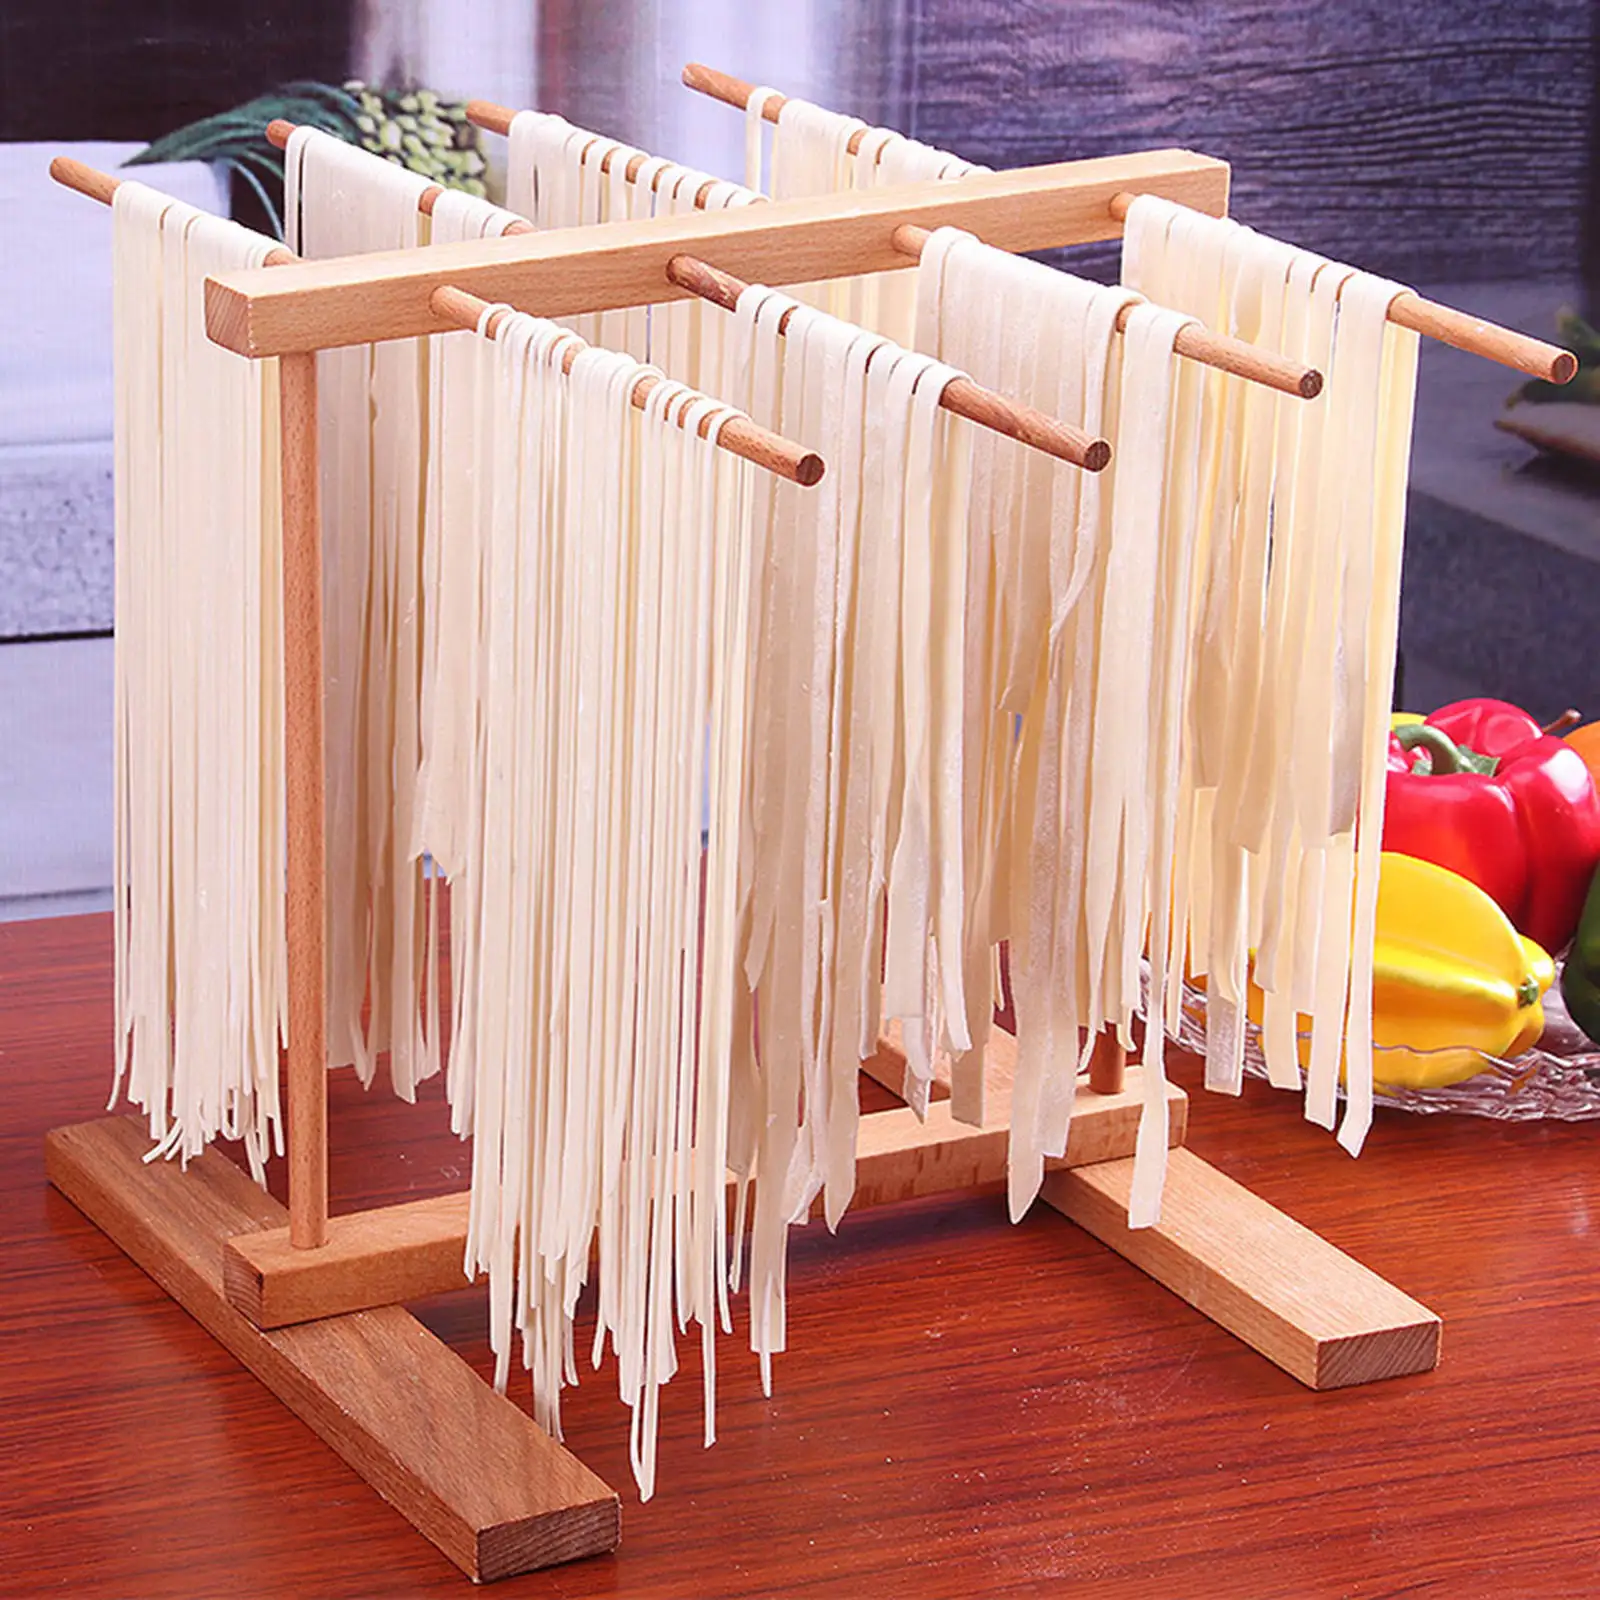 Drying Rack 8 Rows Natural Matrial Beechwood Stand Cooking Tools Pasta Maker Hanger Rack Dryer for Spaghetti Noodles Kitchen